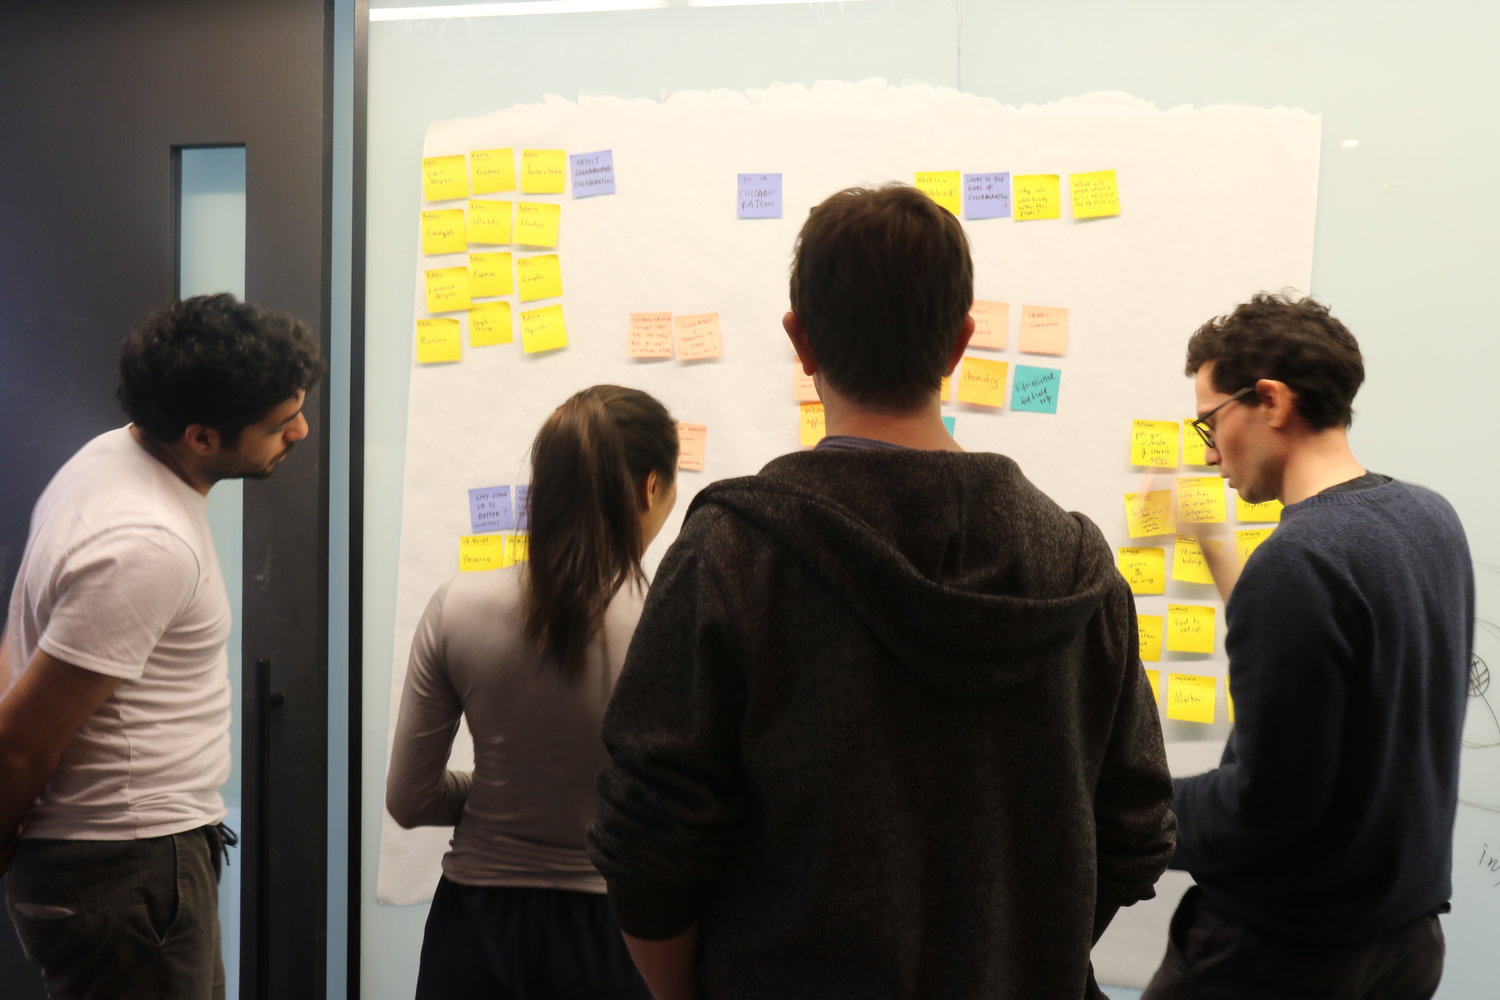 An ideation session with the team involving whiteboards and post-its